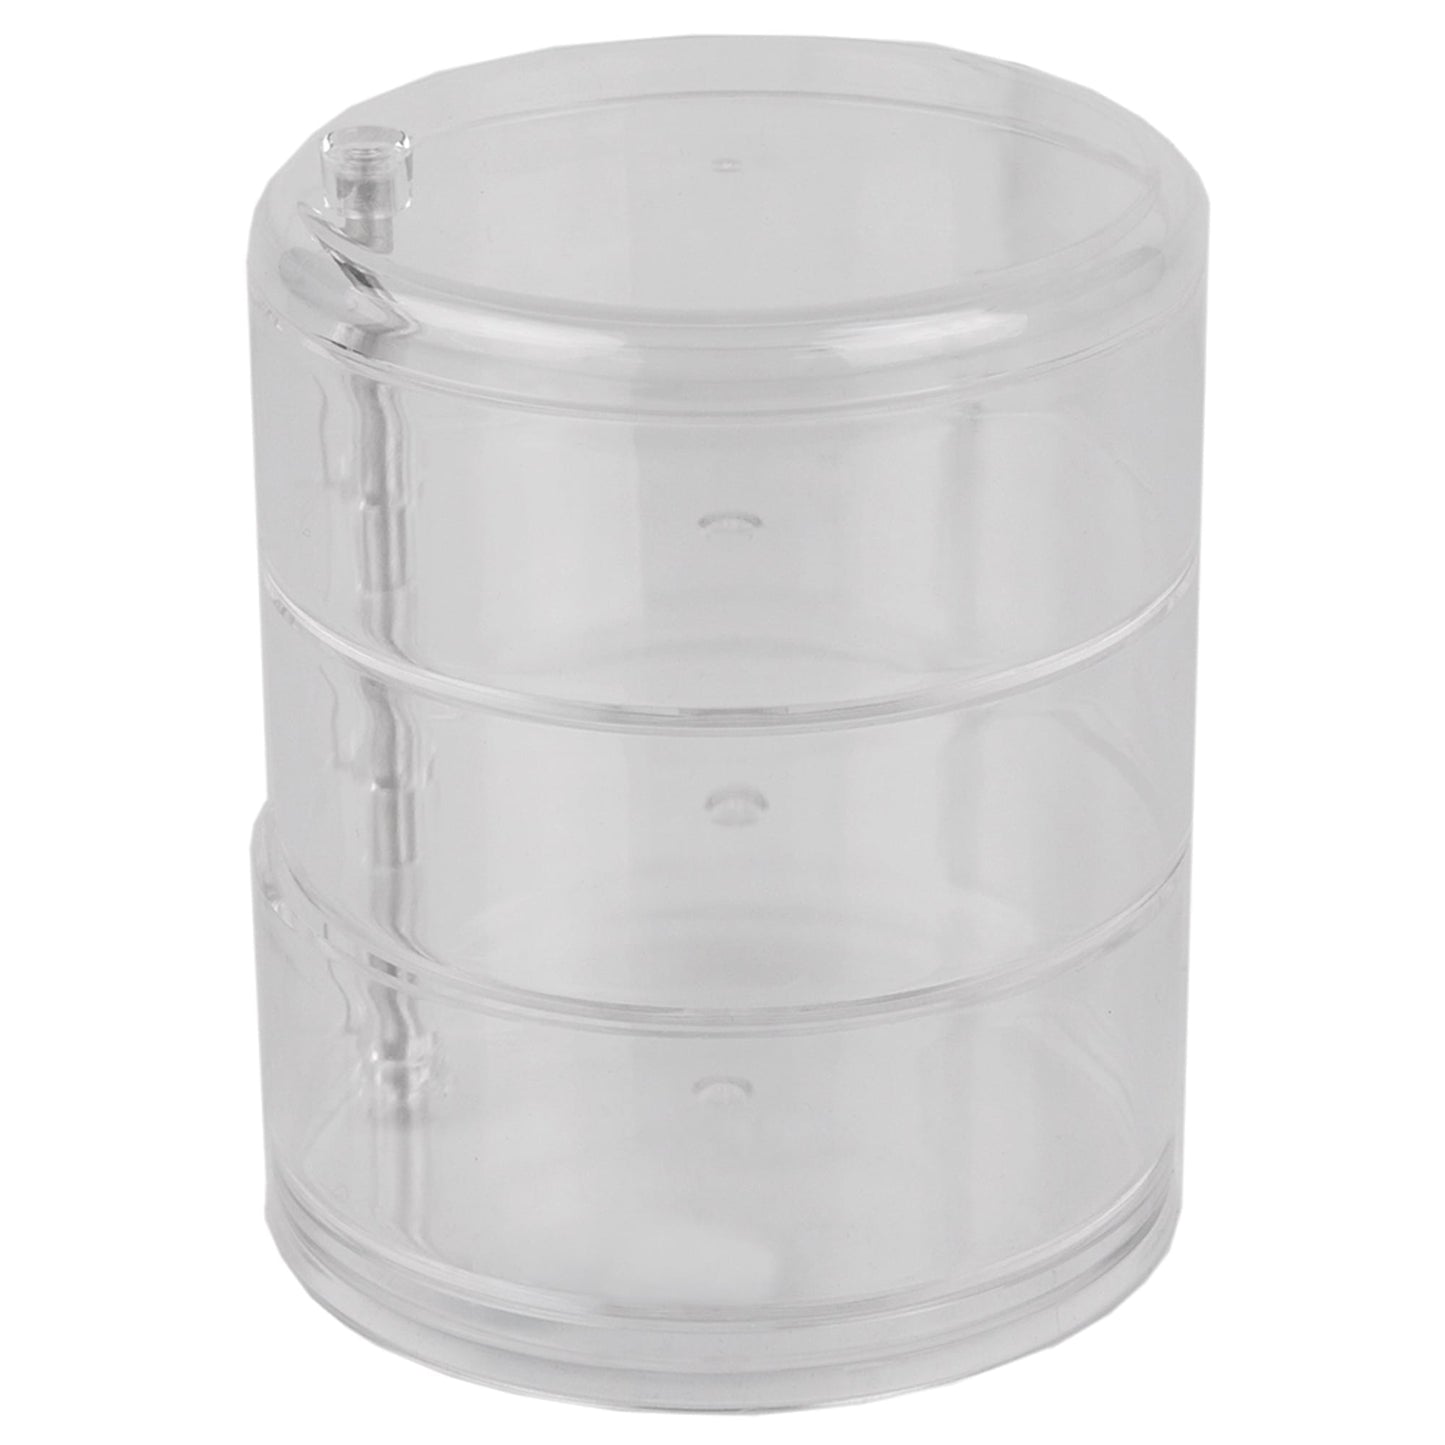 3 Tier Swivel Shatter-Resistant Plastic Cosmetic Organizer, Clear